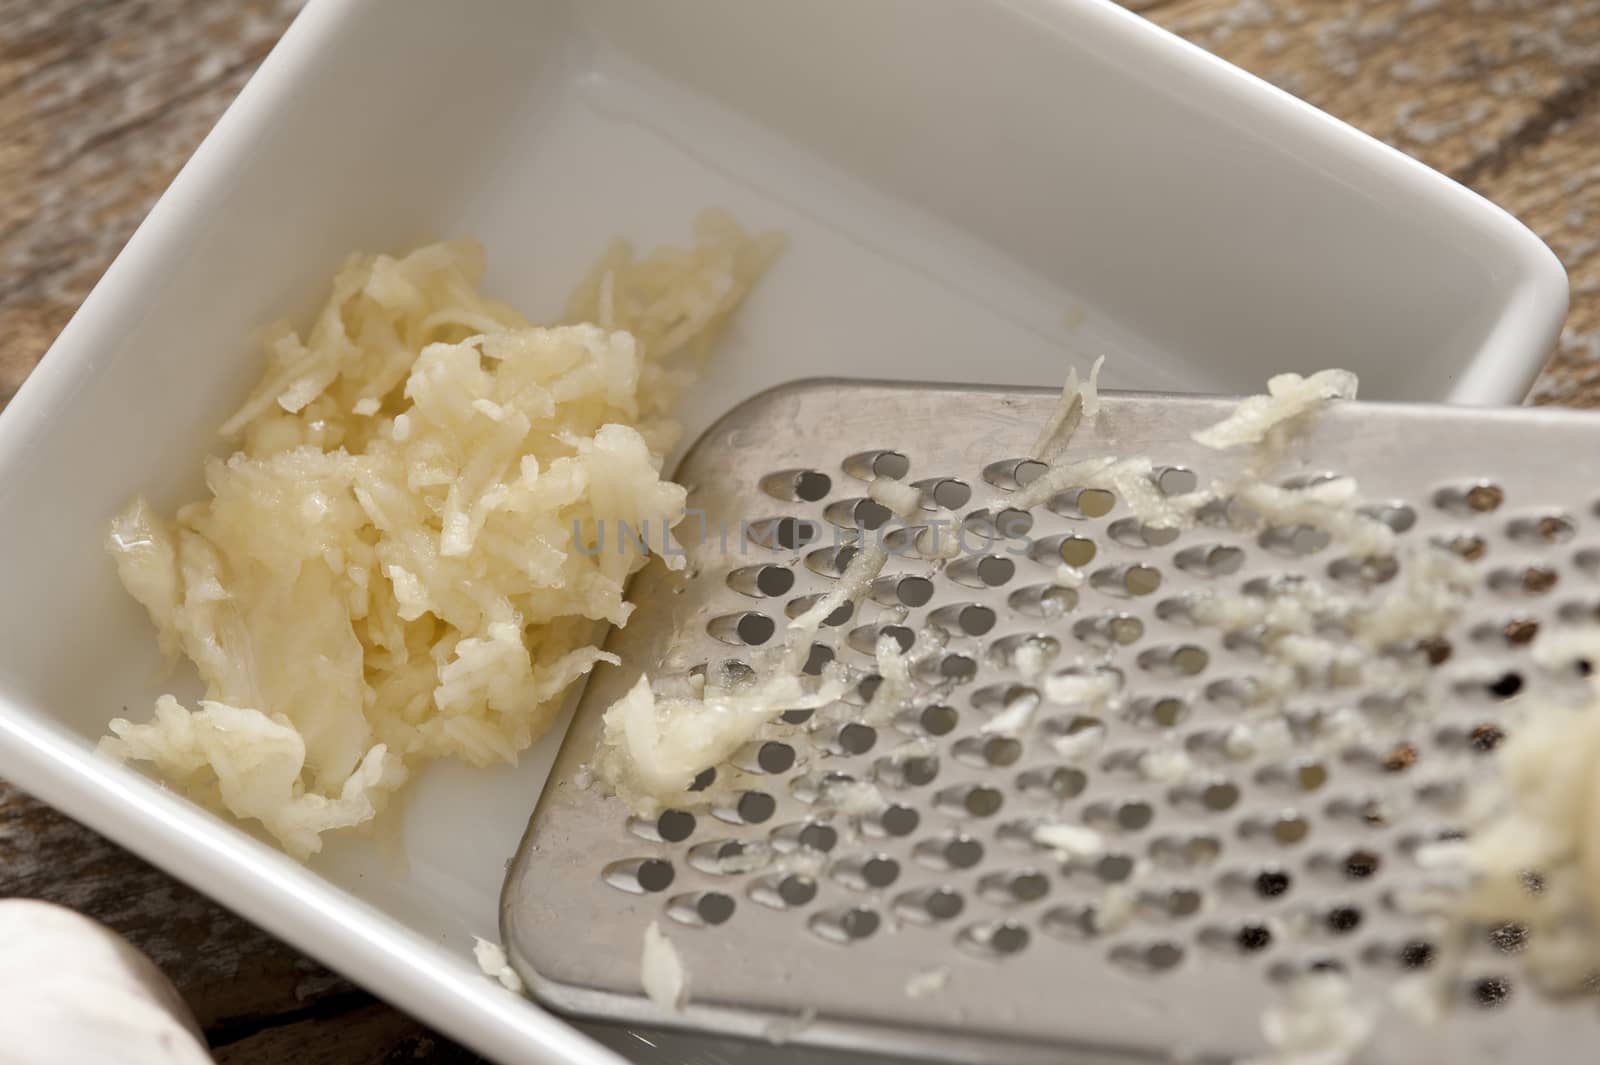 Grated fresh garlic in a small rectangular dish with a stainless steel grater at the side, high angle view